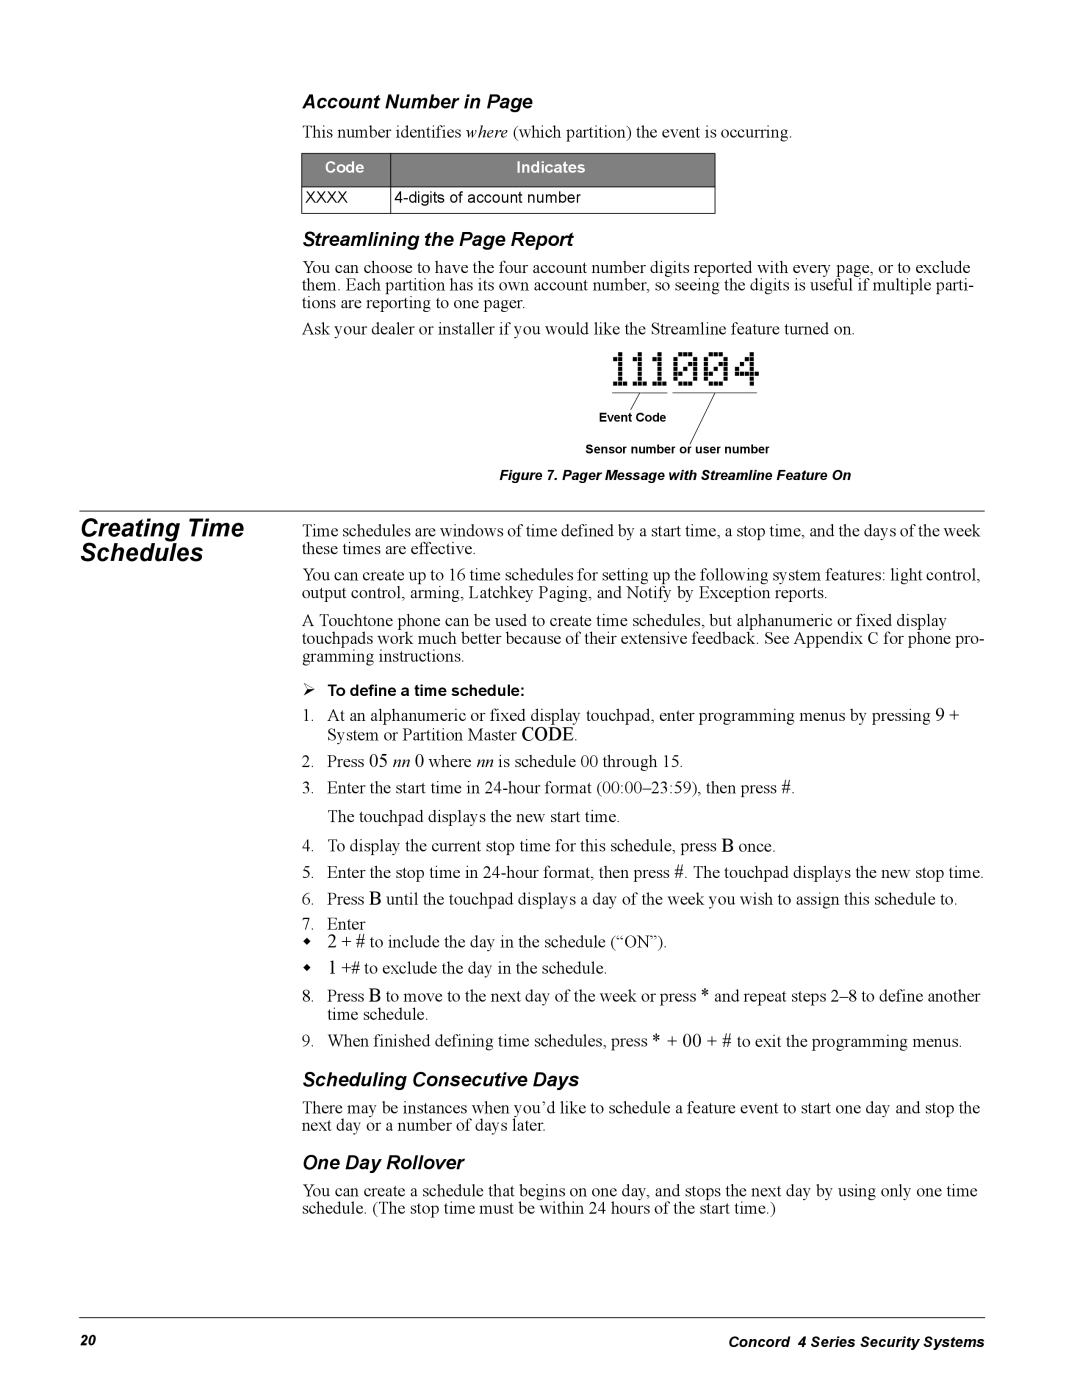 GE Concord 4 Creating Time Schedules, Account Number in Page, Streamlining the Page Report, Scheduling Consecutive Days 